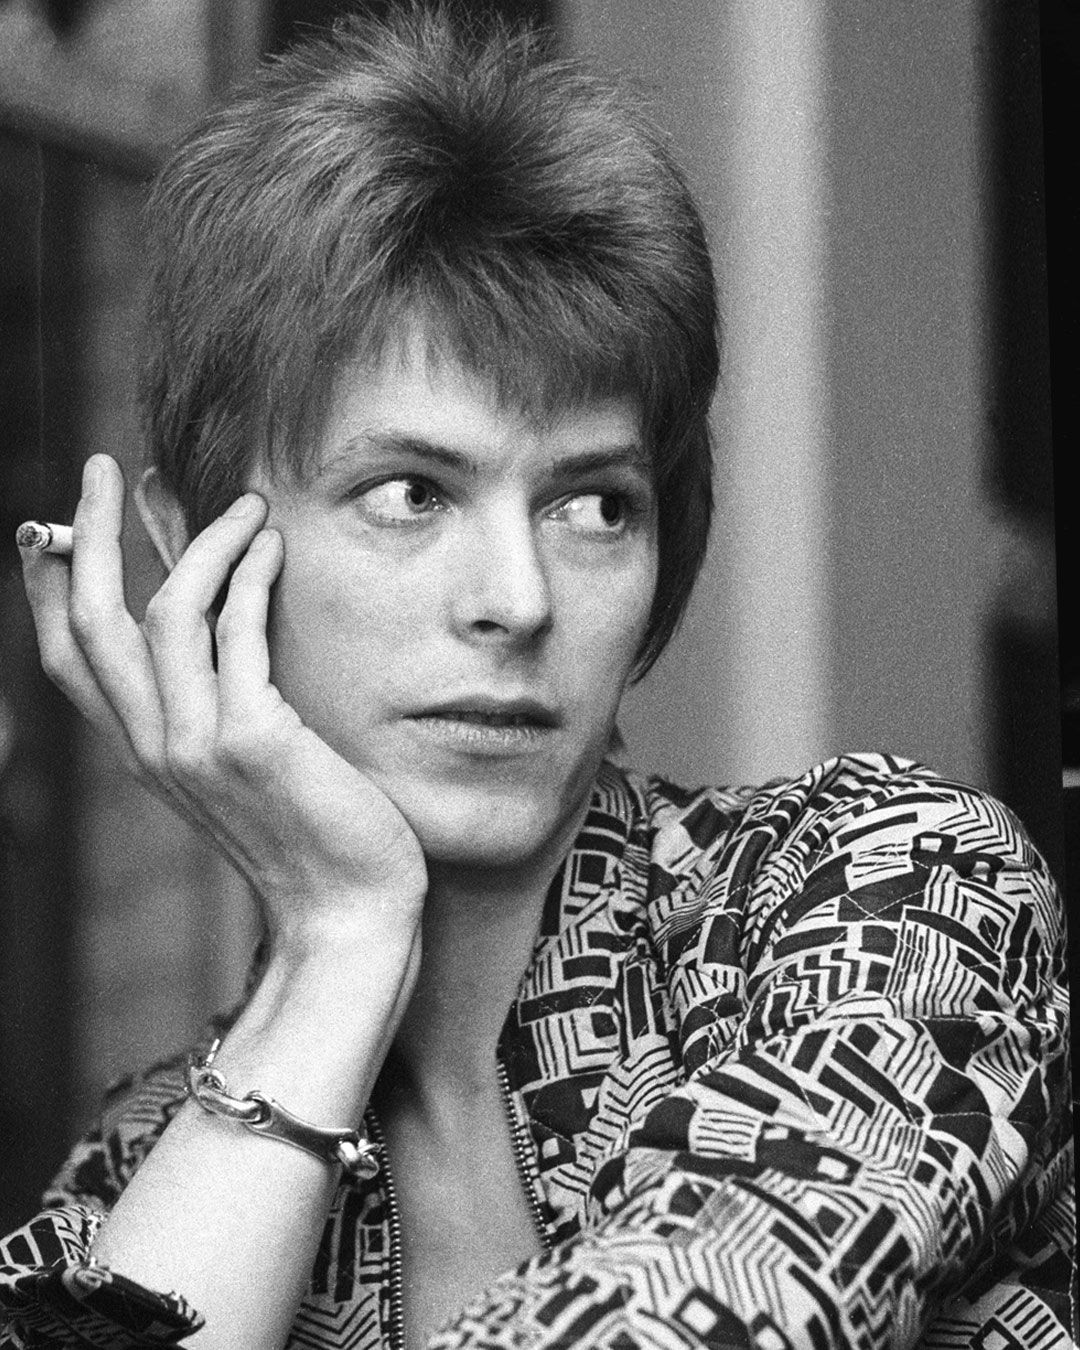 Top 5 David Bowie songs to rock out to on his 75th birthday